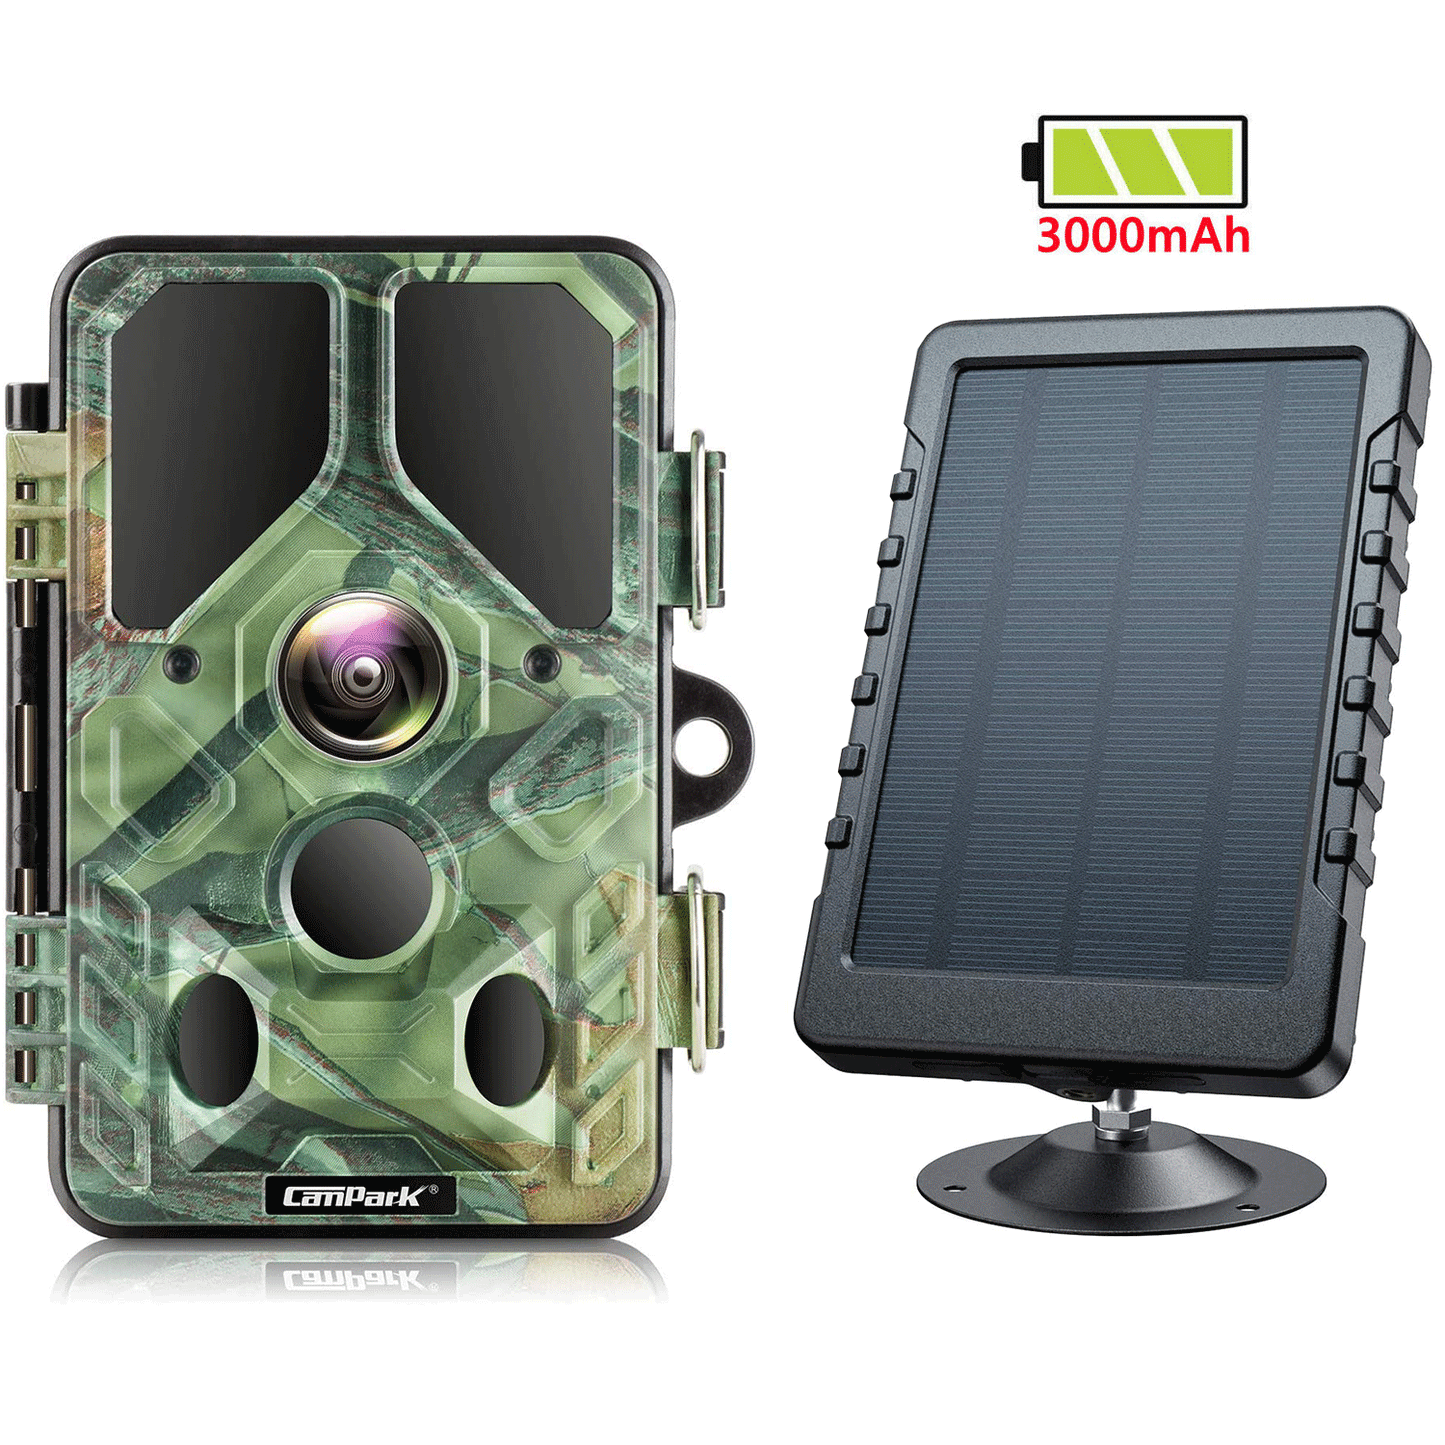 CAMPARK WiFi Trail Camera with 3000mAh Solar Panel Bundle 20MP 1296P Hunting Game Camera with 940nm IR LEDs Night Vision Waterproof 2.4"LCD and Trail Camera Solar Power Bank Waterproof 6V/2A